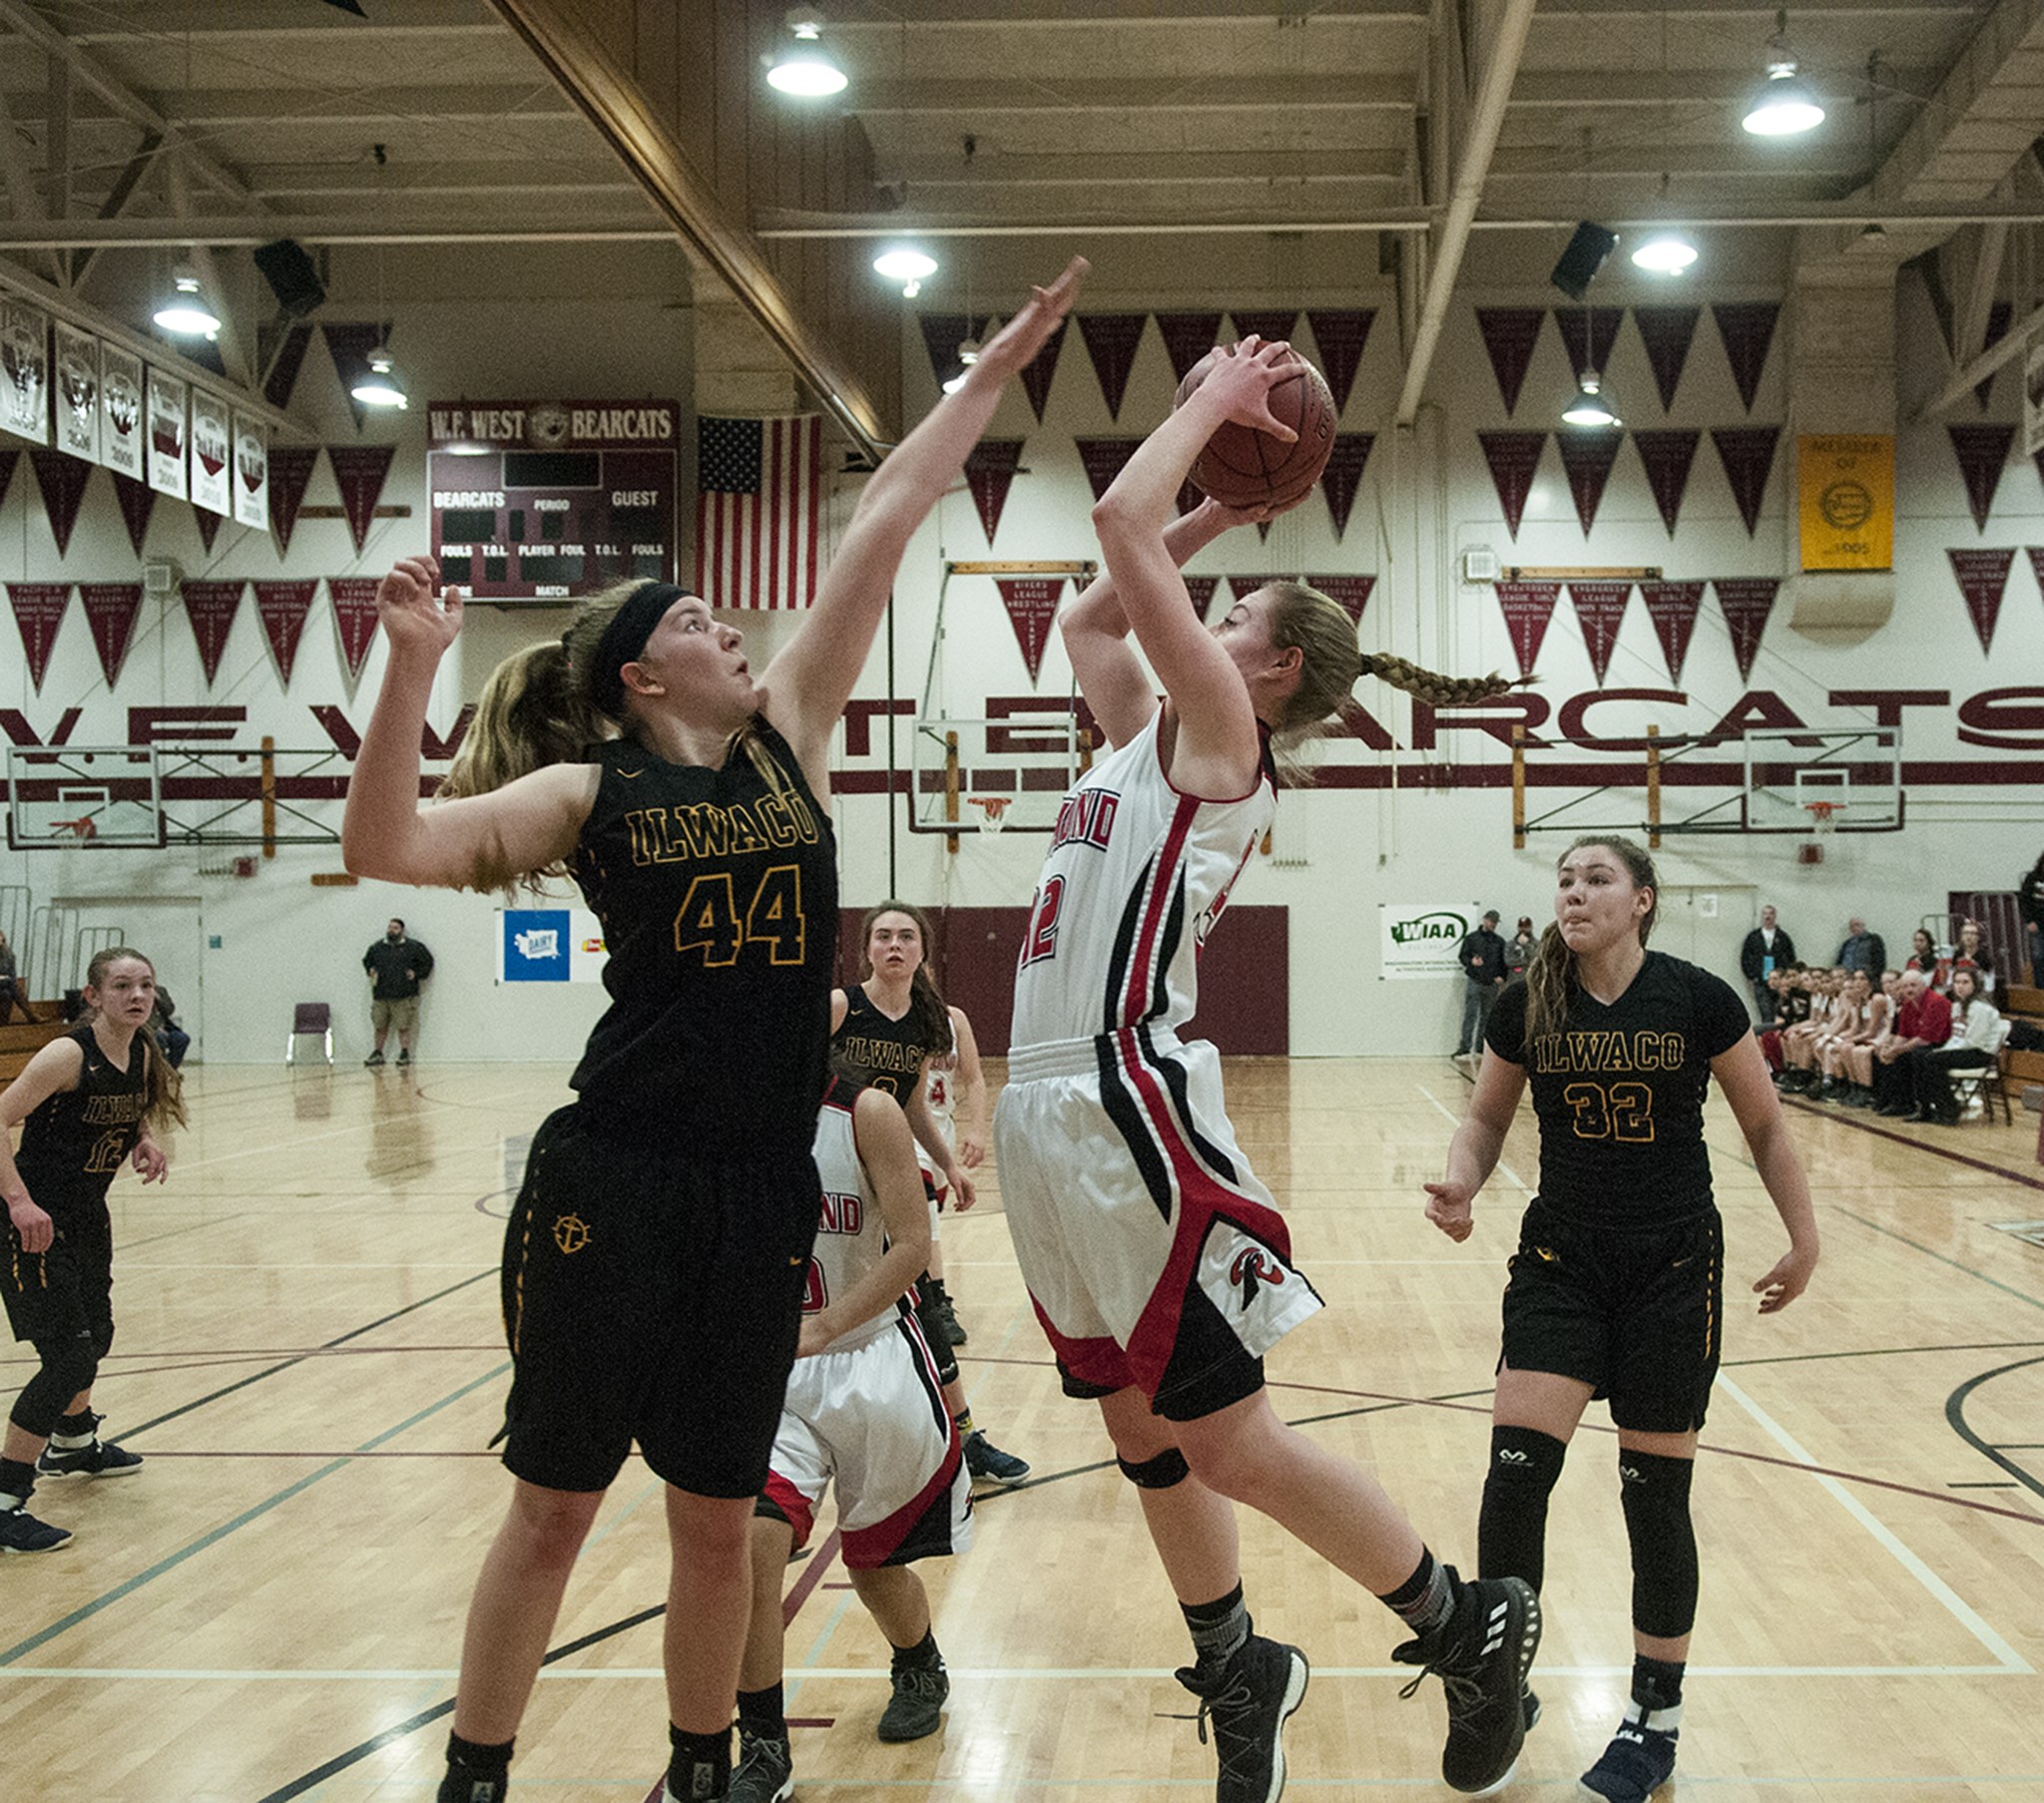 (Brendan Carl | The Daily World) Raymond’s Winter Newman goes up for a shot as Ilwaco’s Madelin Jacobson tries to get a block during a regional 2B girls contest at Chehalis on Saturday. The Fisherman defeated the Seagulls 57-36.